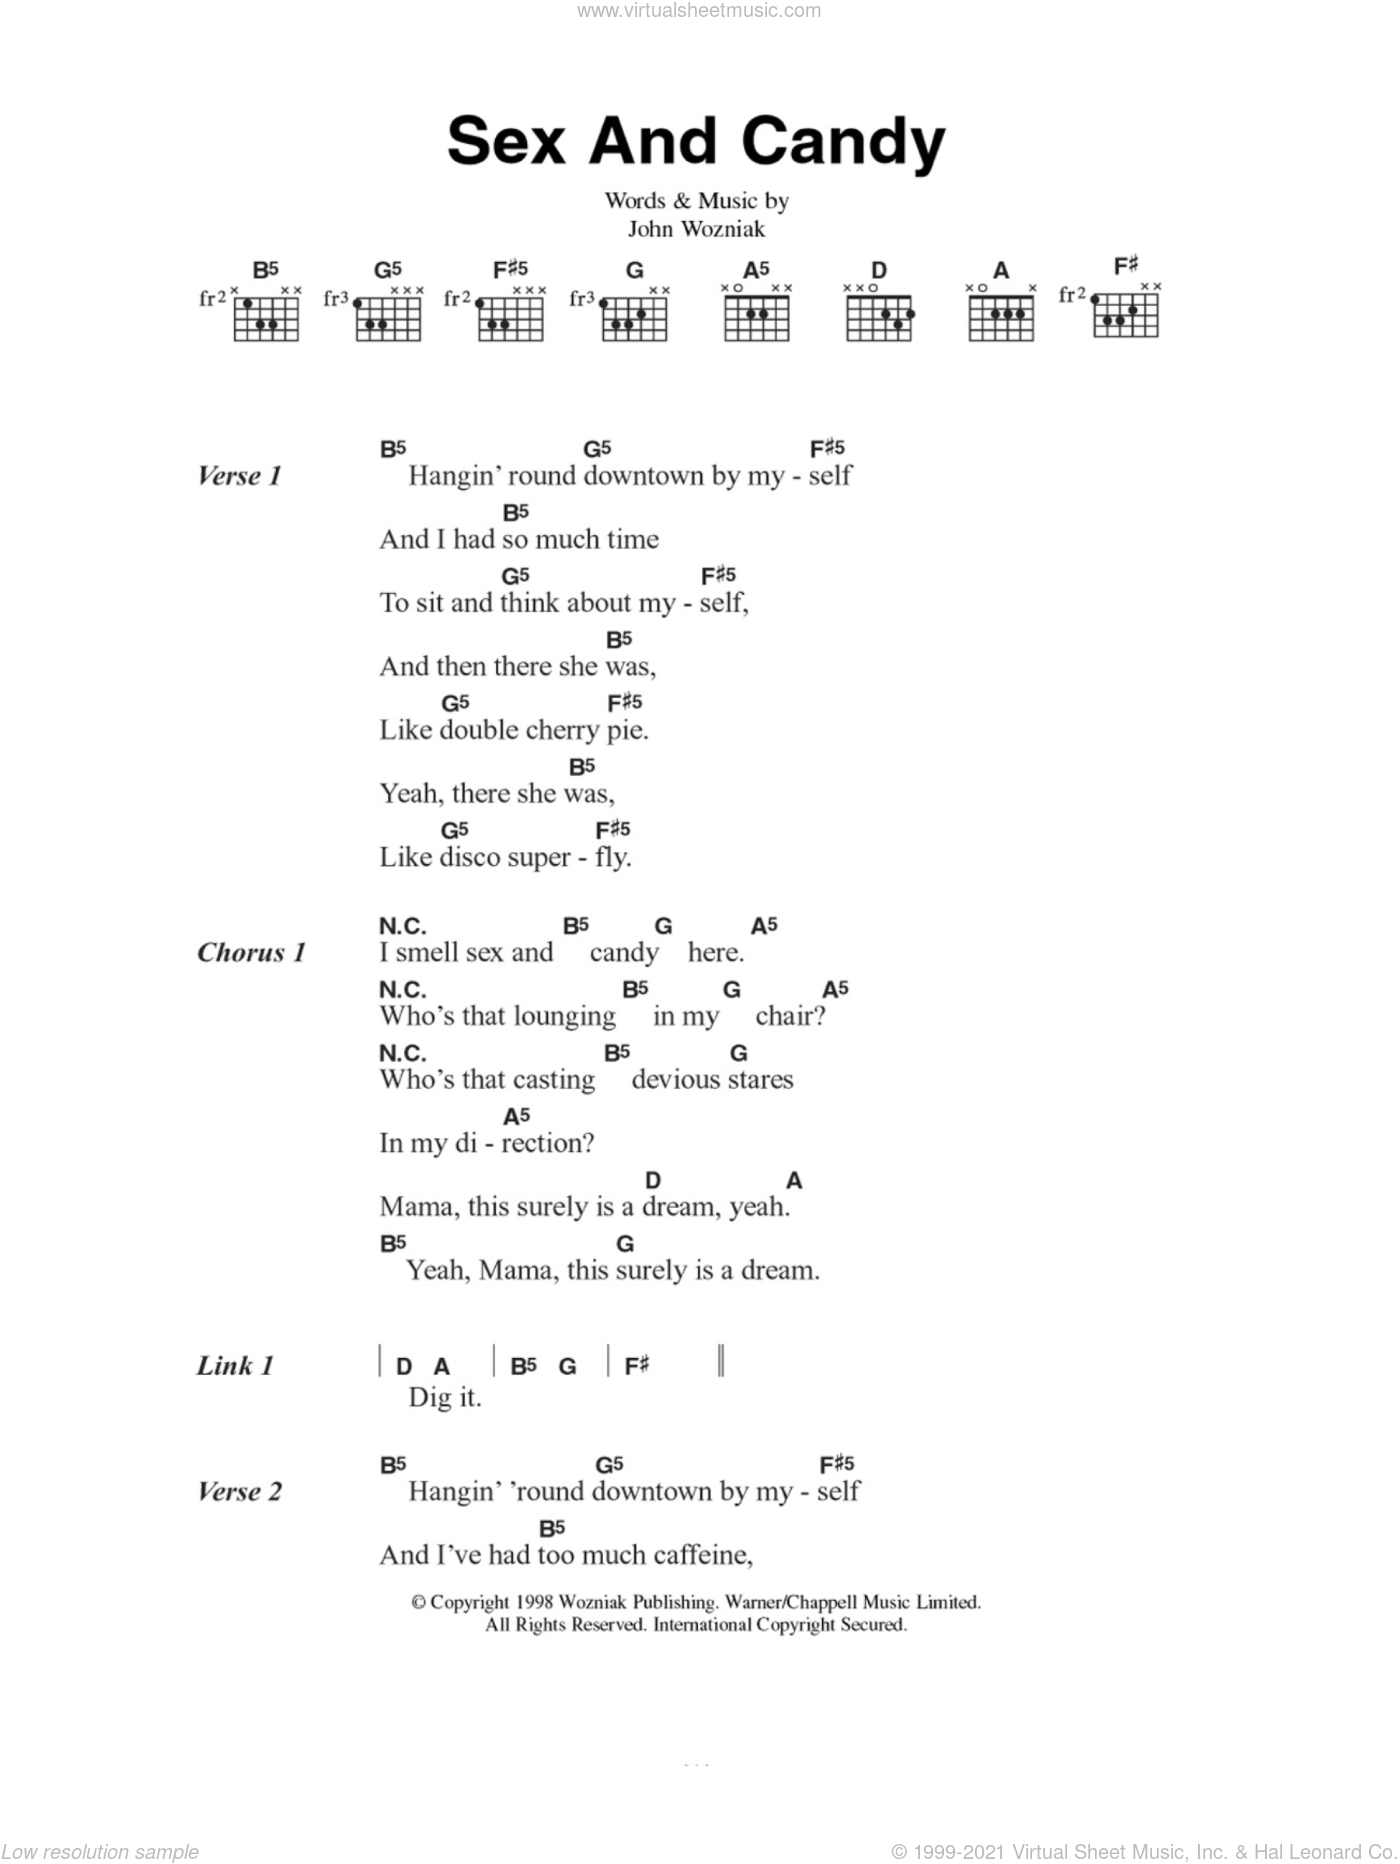 Playground Sex And Candy Sheet Music For Guitar Chords